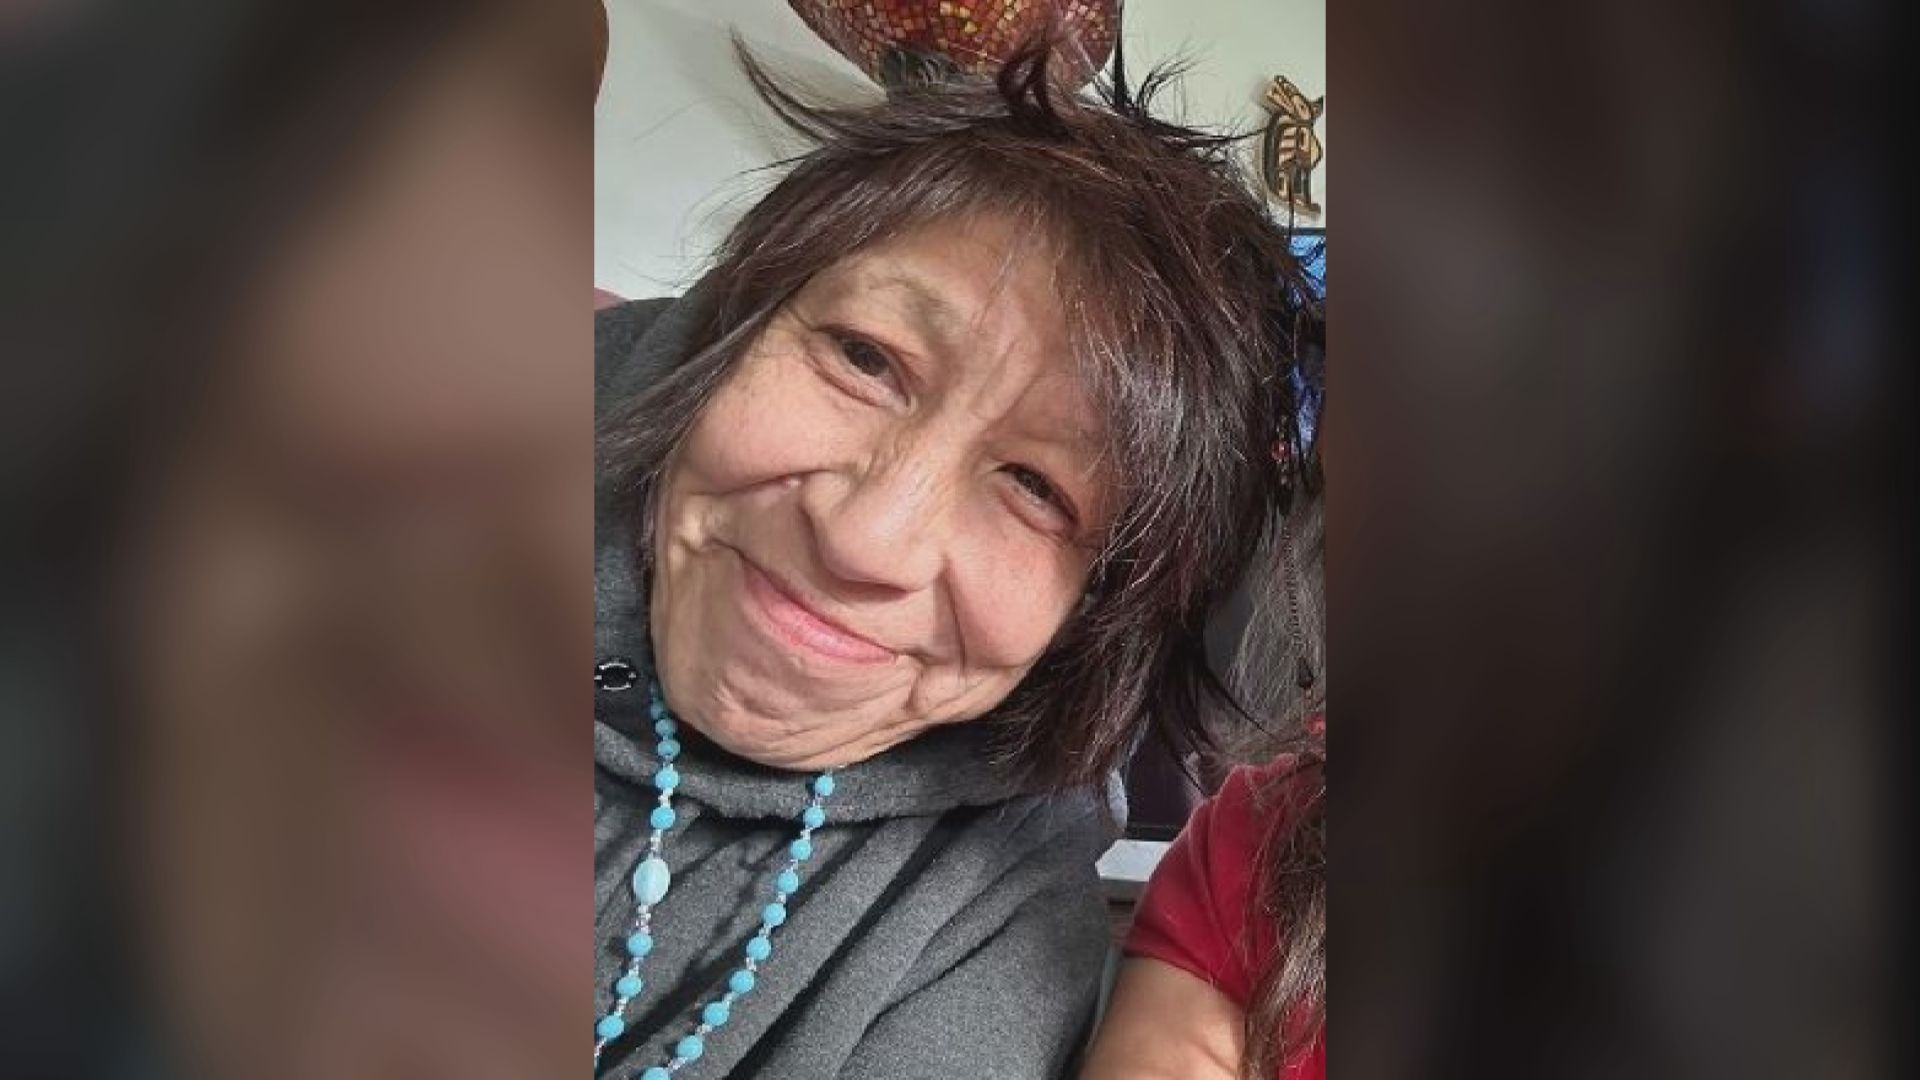 Vancouver Island woman last seen on Dec. 30, reported missing on Feb. 8